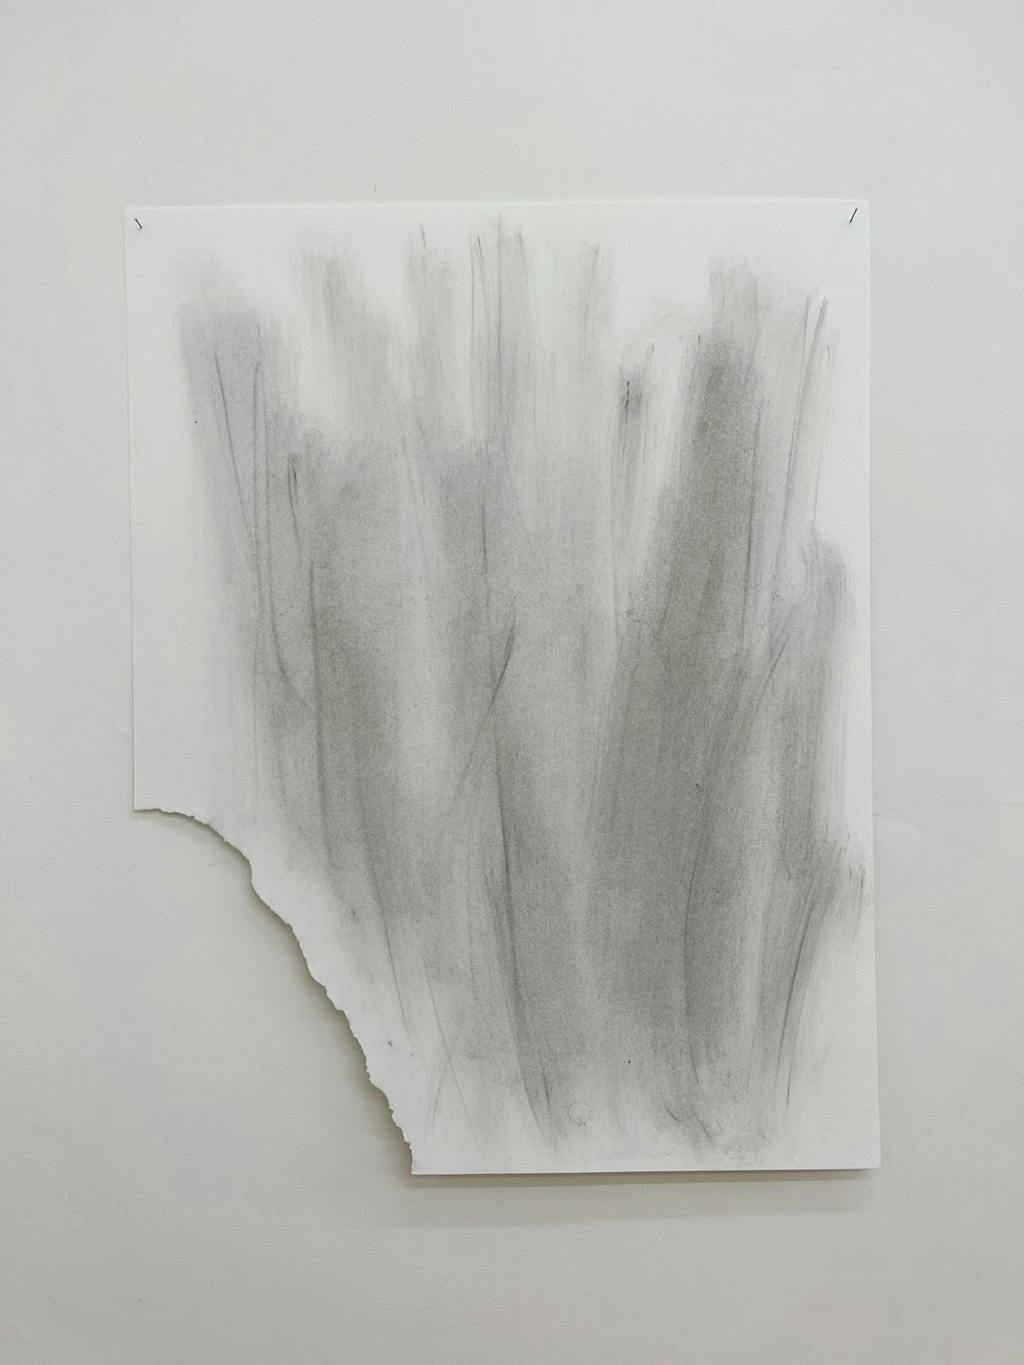 <p style="font-size:10px">Charbel-joseph H. Boutros, 2021, But even dead can dance, Love., paper, ashes, 65 x 50 cm</p>

<p style="font-size:10px">Ashes coming from a burned paper are applied on that same paper.</p> - © Image courtesy of the artist and Grey Noise, Dubai., Paris Internationale